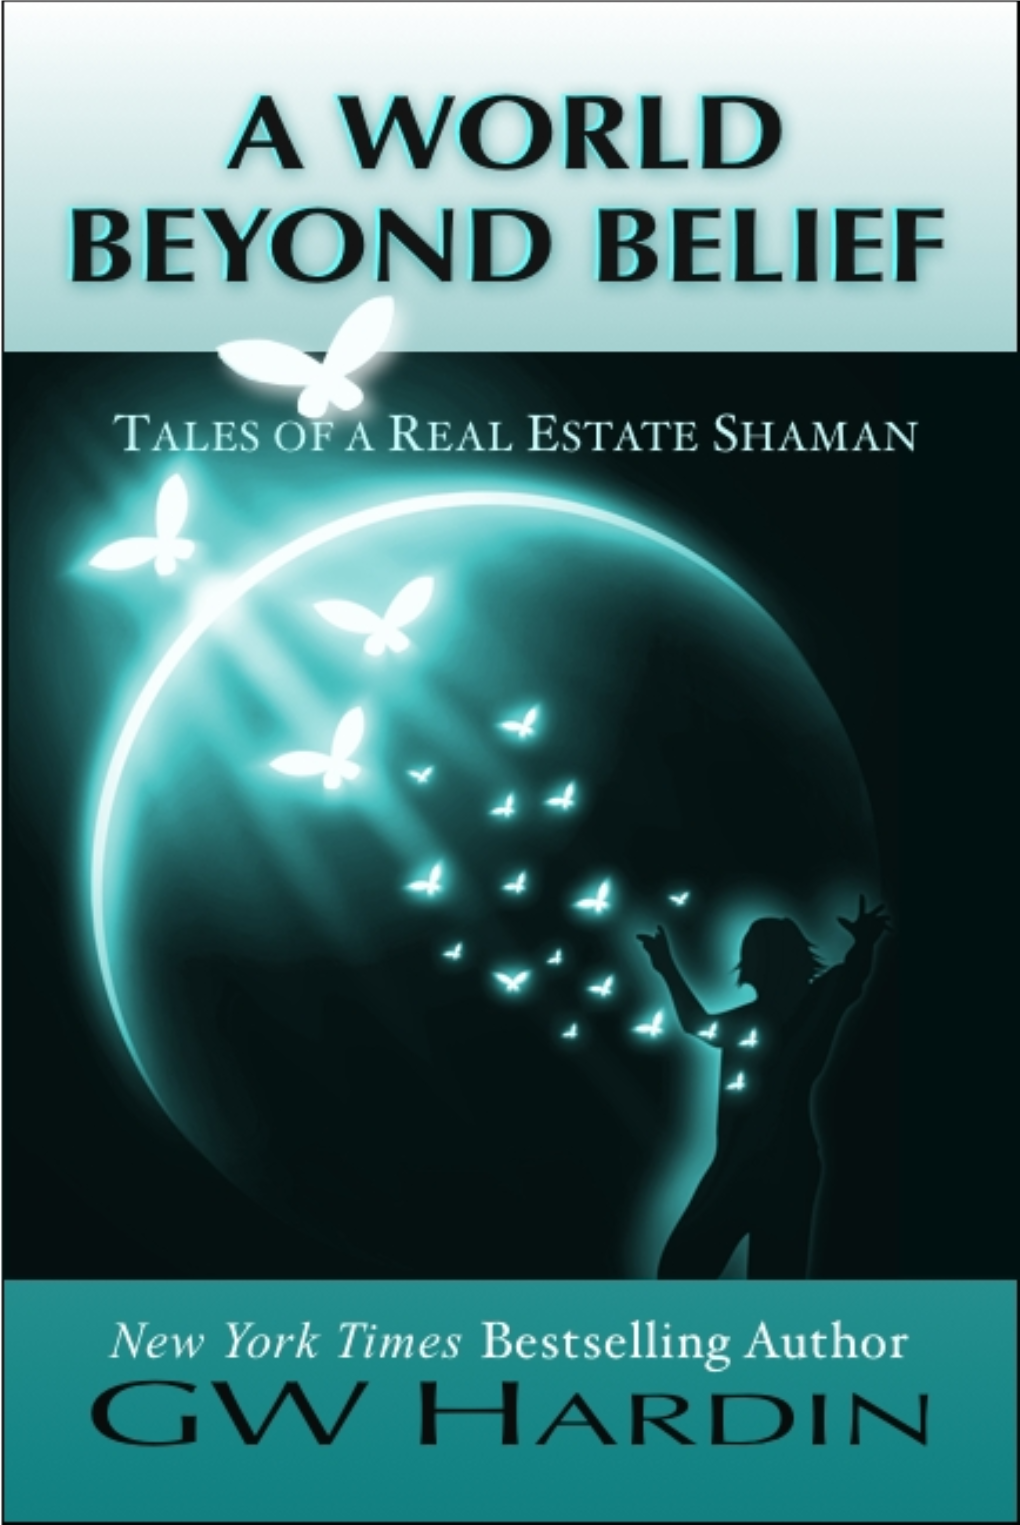 A WORLD BEYOND BELIEF: Tales of a Real Estate Shaman